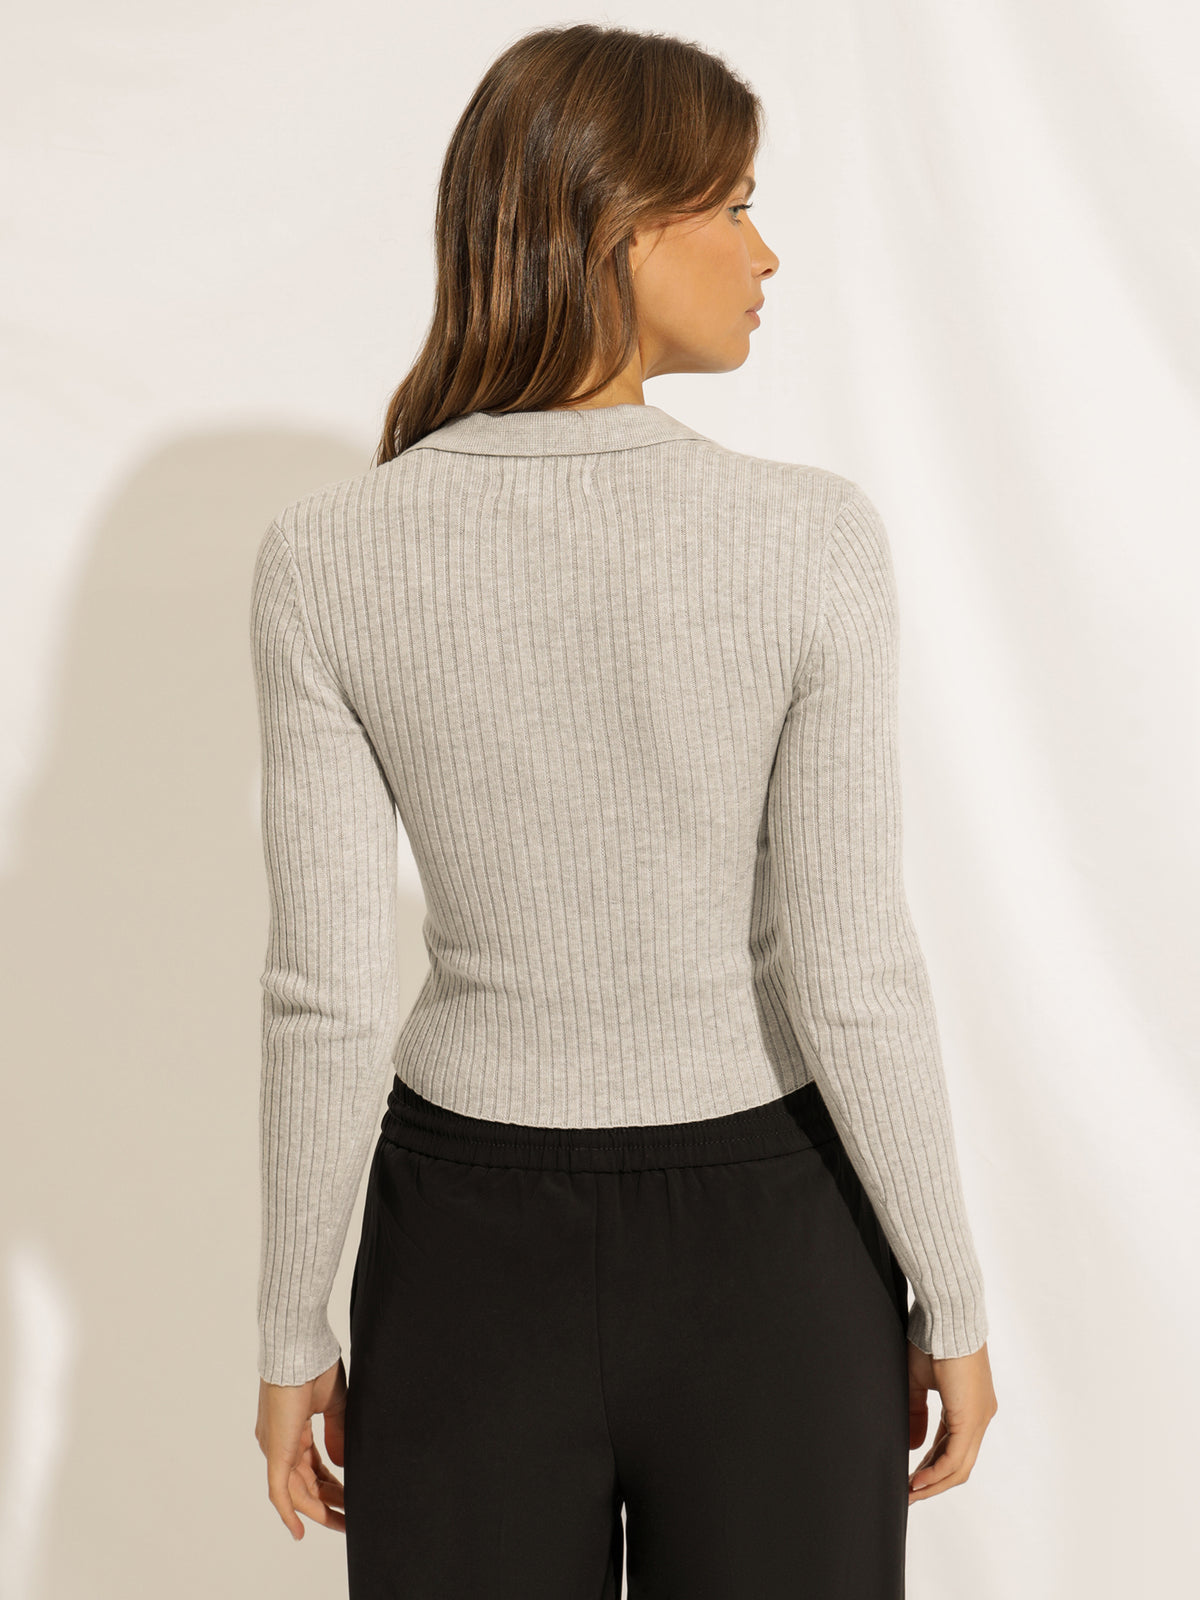 Paige Knit Top in Grey Marle